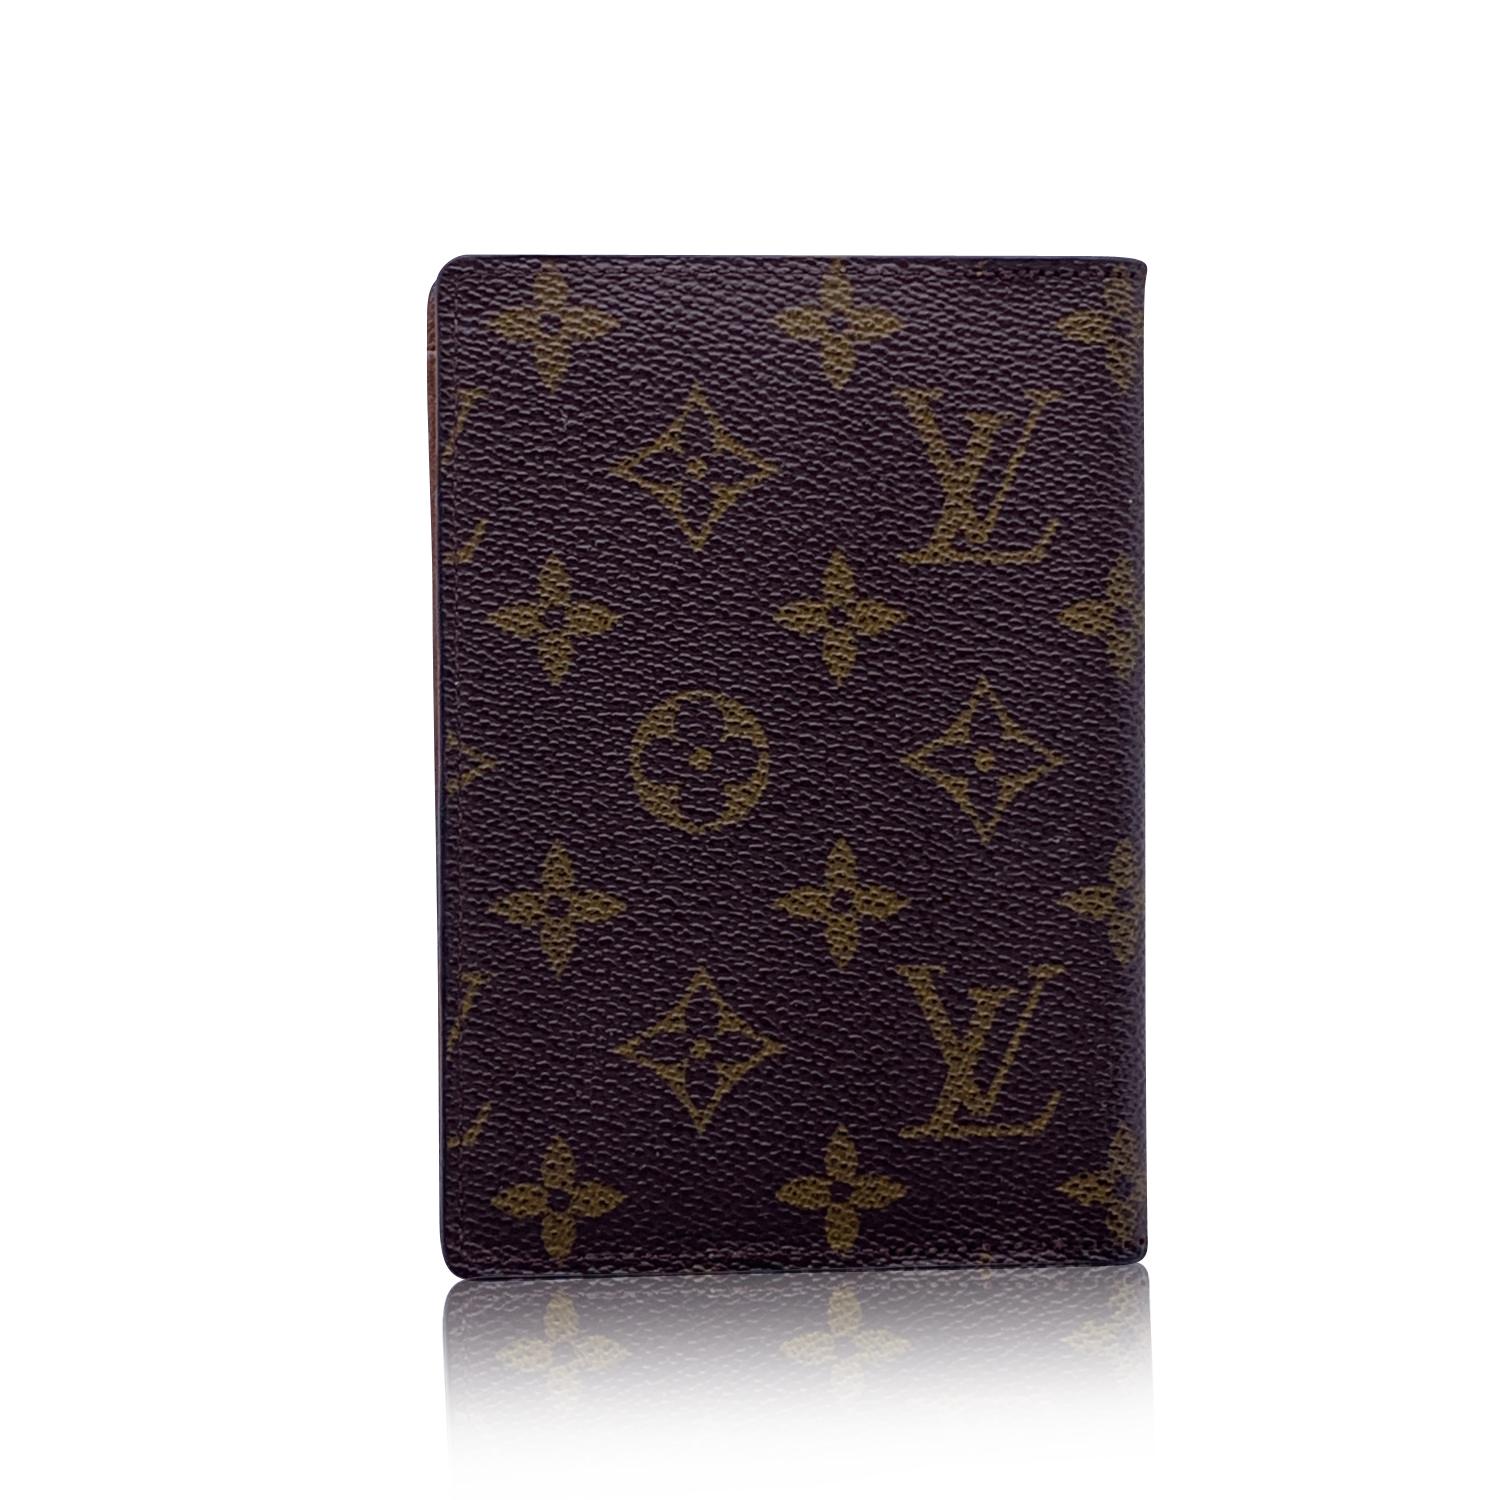 Louis Vuitton vintage Passport Holder Case Crafted in brown monogram canvas. Tan leather lining. 'Louis Vuitton Paris - Made in France' embossed inside. Authenticity serial number embossed inside (MI0975).

Details

MATERIAL: Canvas

COLOR: